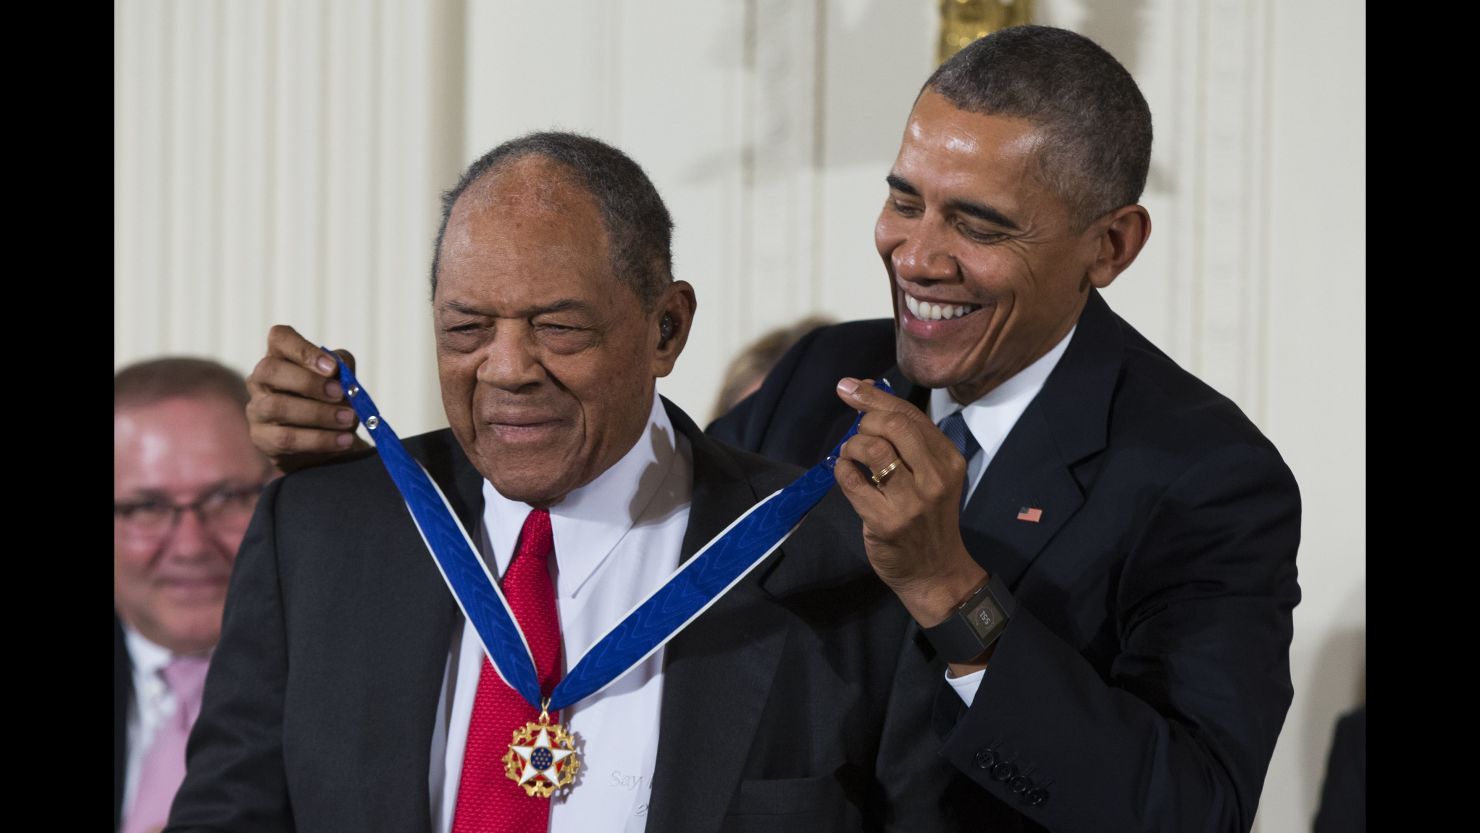 Baseball Hall of Famer Willie Mays, left, receives the Presidential Medal of Freedom from President Barack Obama during a ceremony in the East Room of the White House, on Tuesday, Nov. 24, 2015, in Washington. 